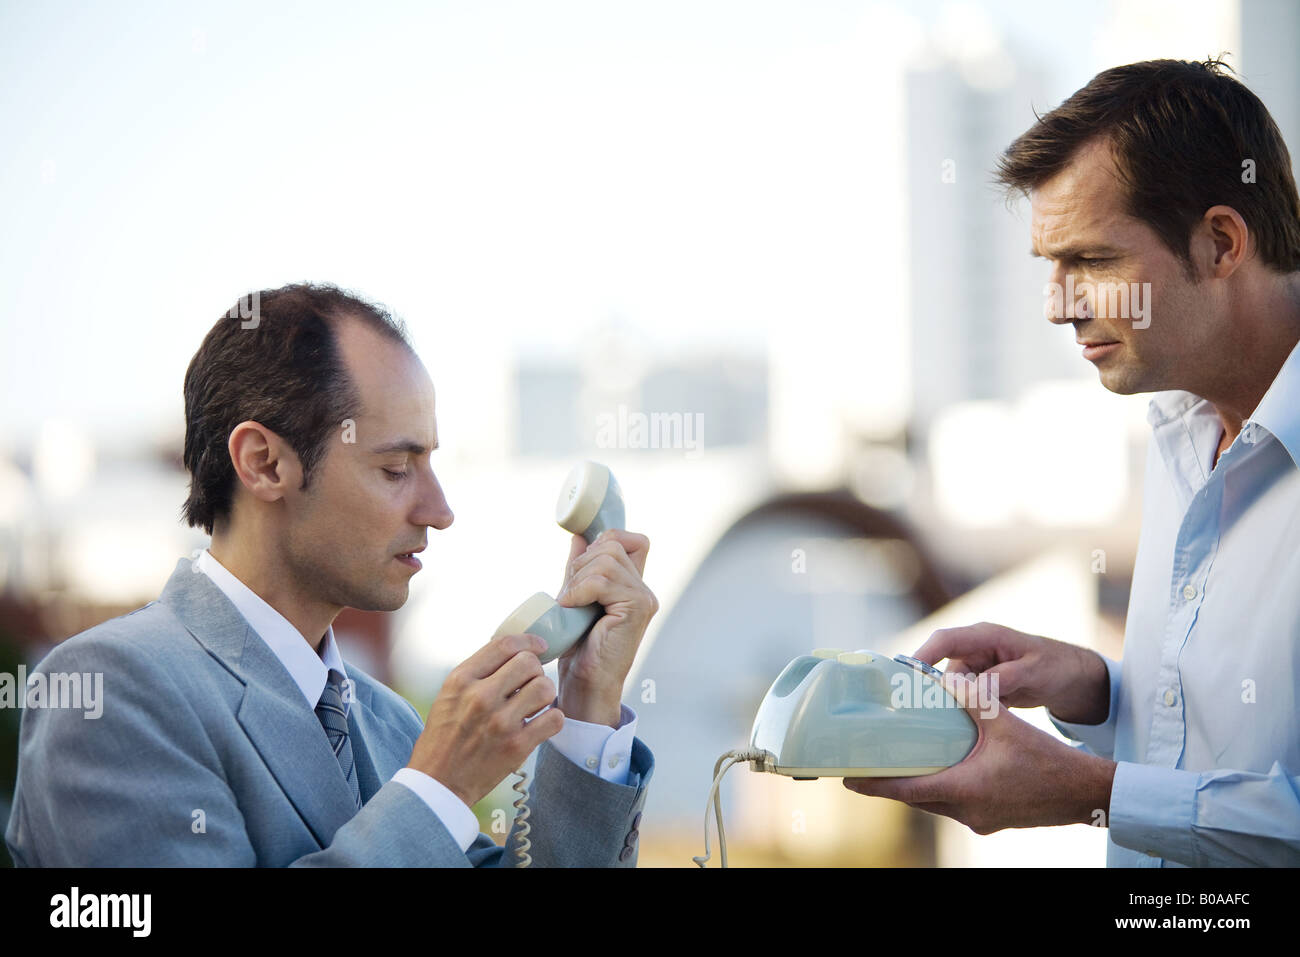 Two businessmen standing face to face, looking at landline phone, side view Stock Photo